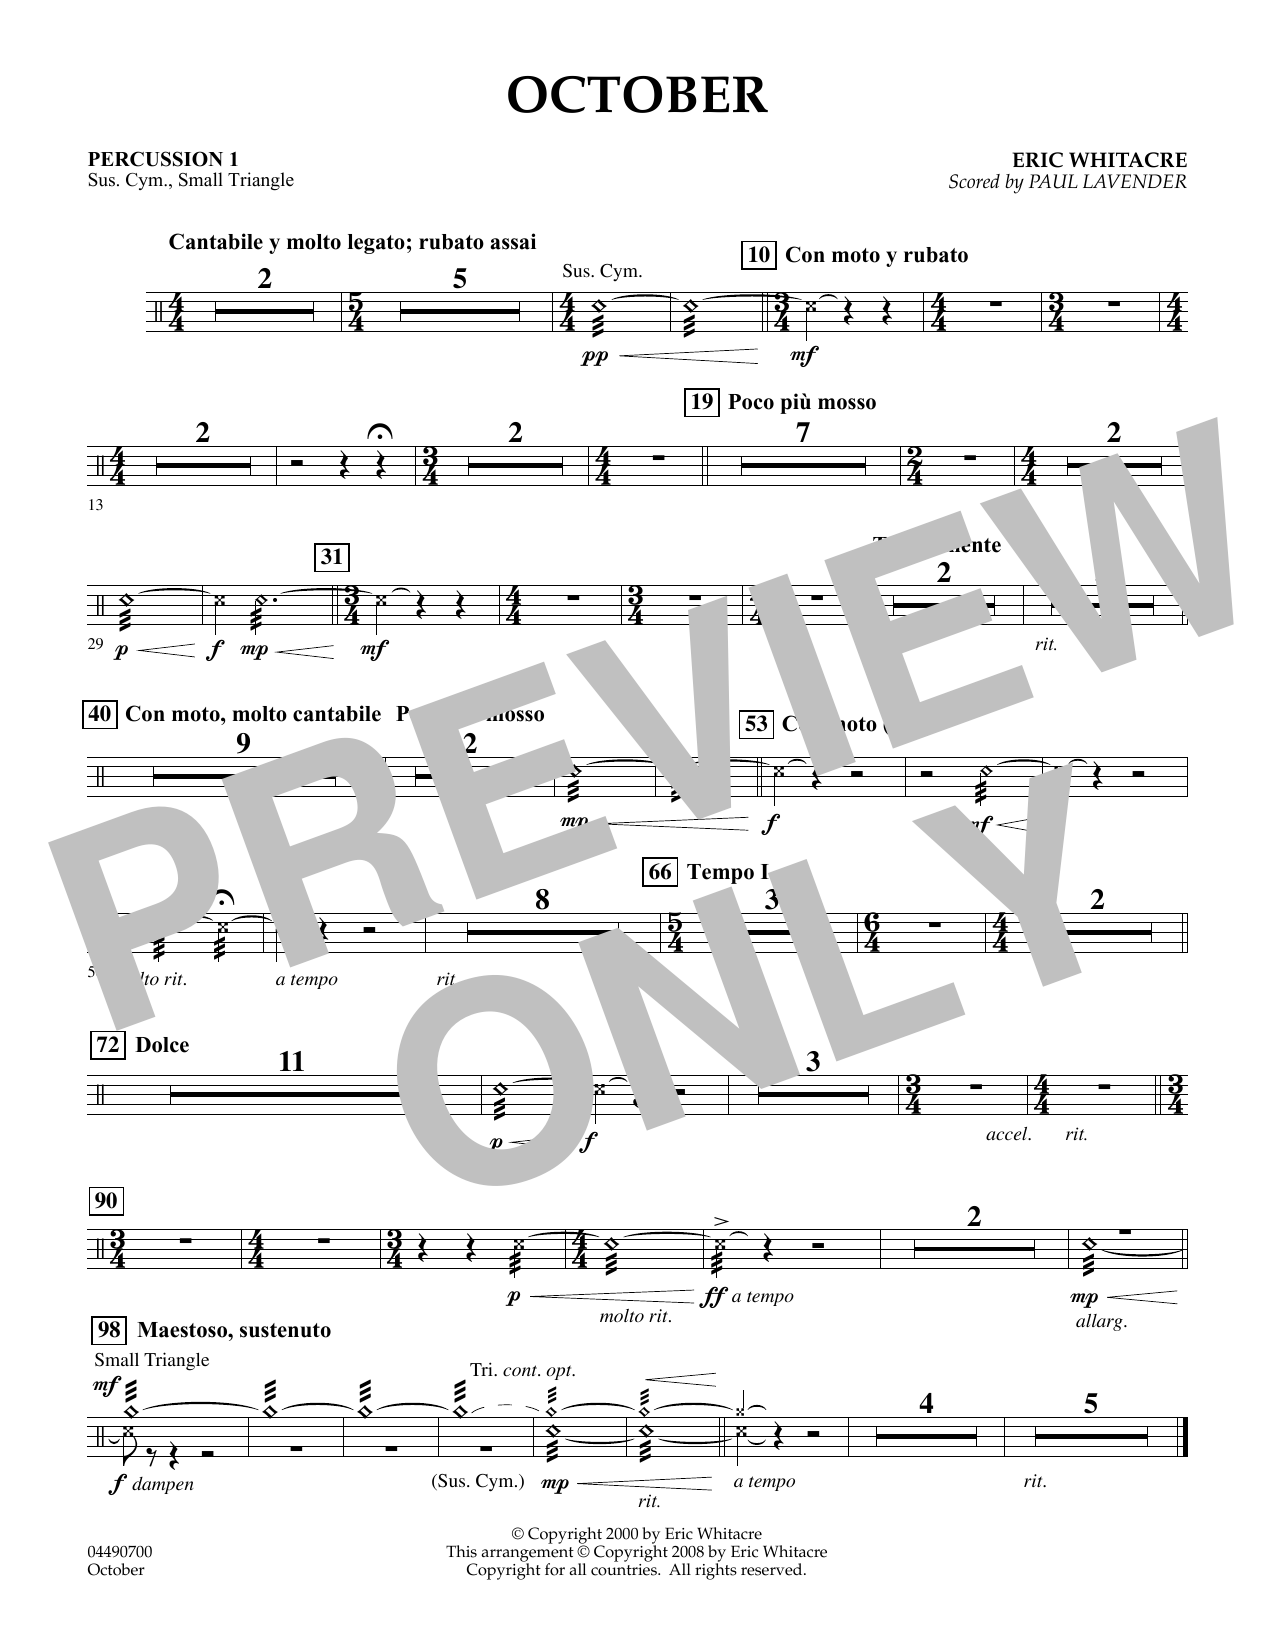 Download Eric Whitacre October - Percussion 1 (arr. Paul Laven Sheet Music